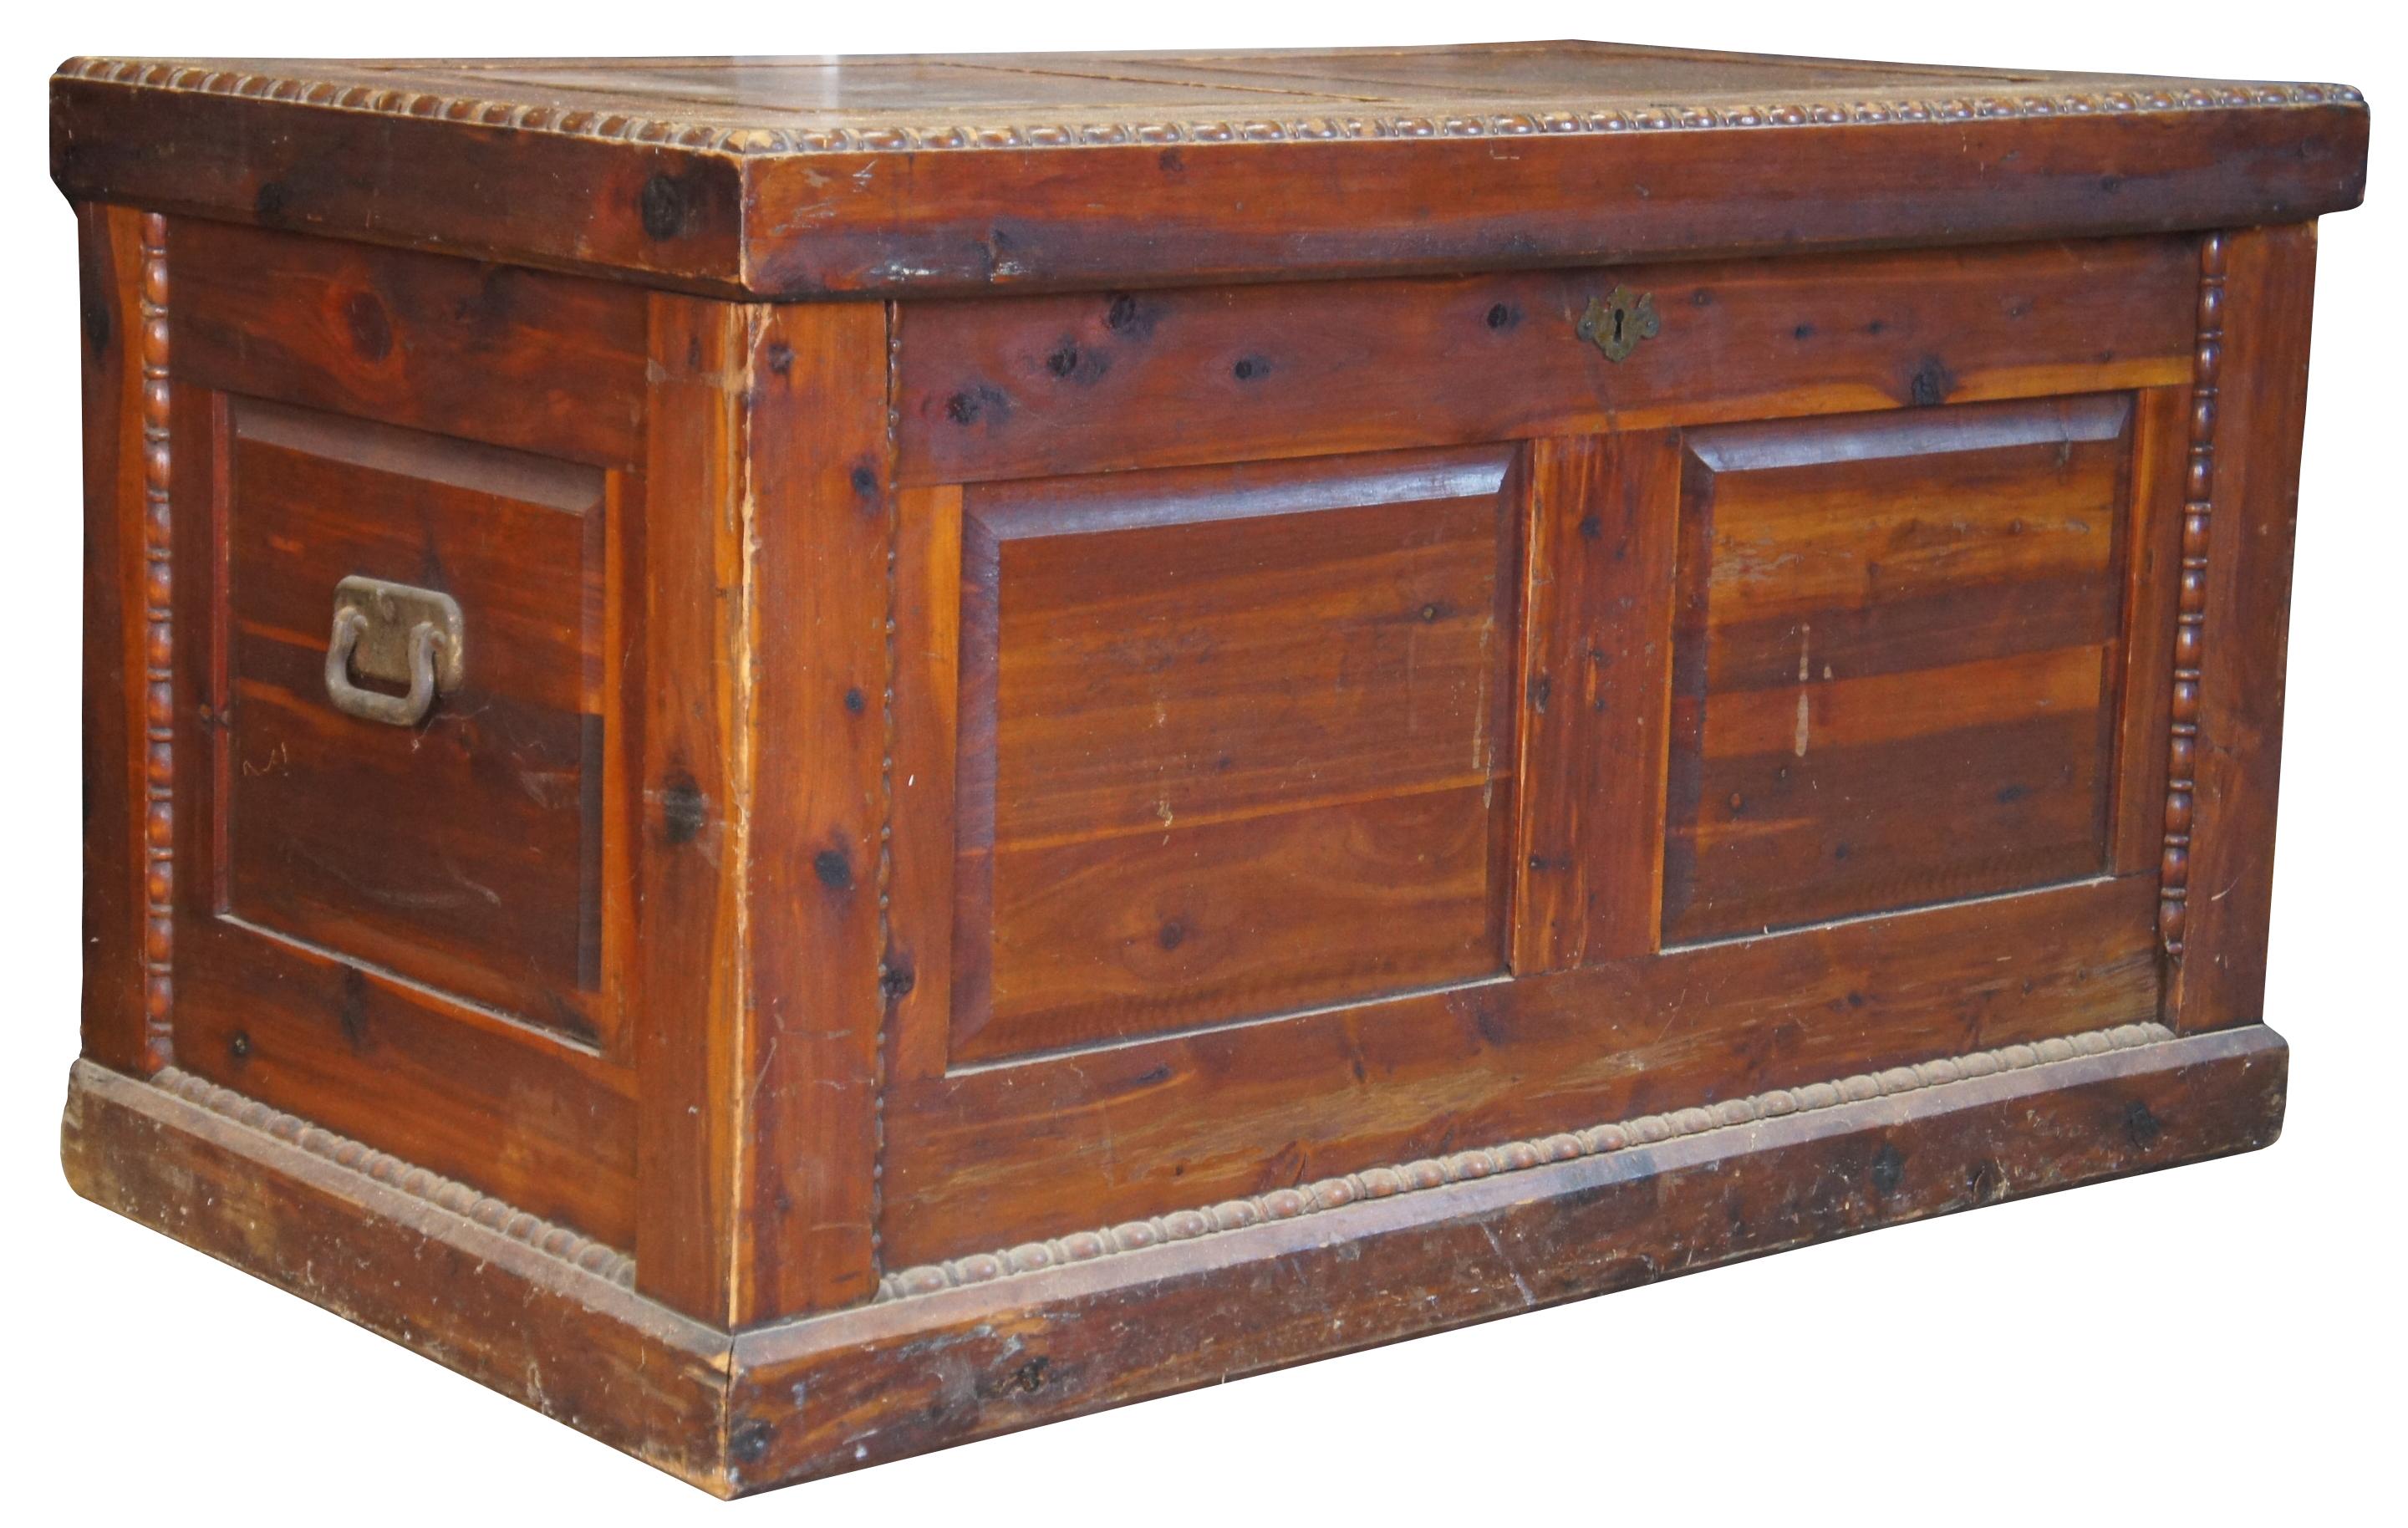 Early 20th century cedar chest. Feature a paneled case with ornately beaded trim and brass handles. Great for use to store blanket or as a table. Measure: 42